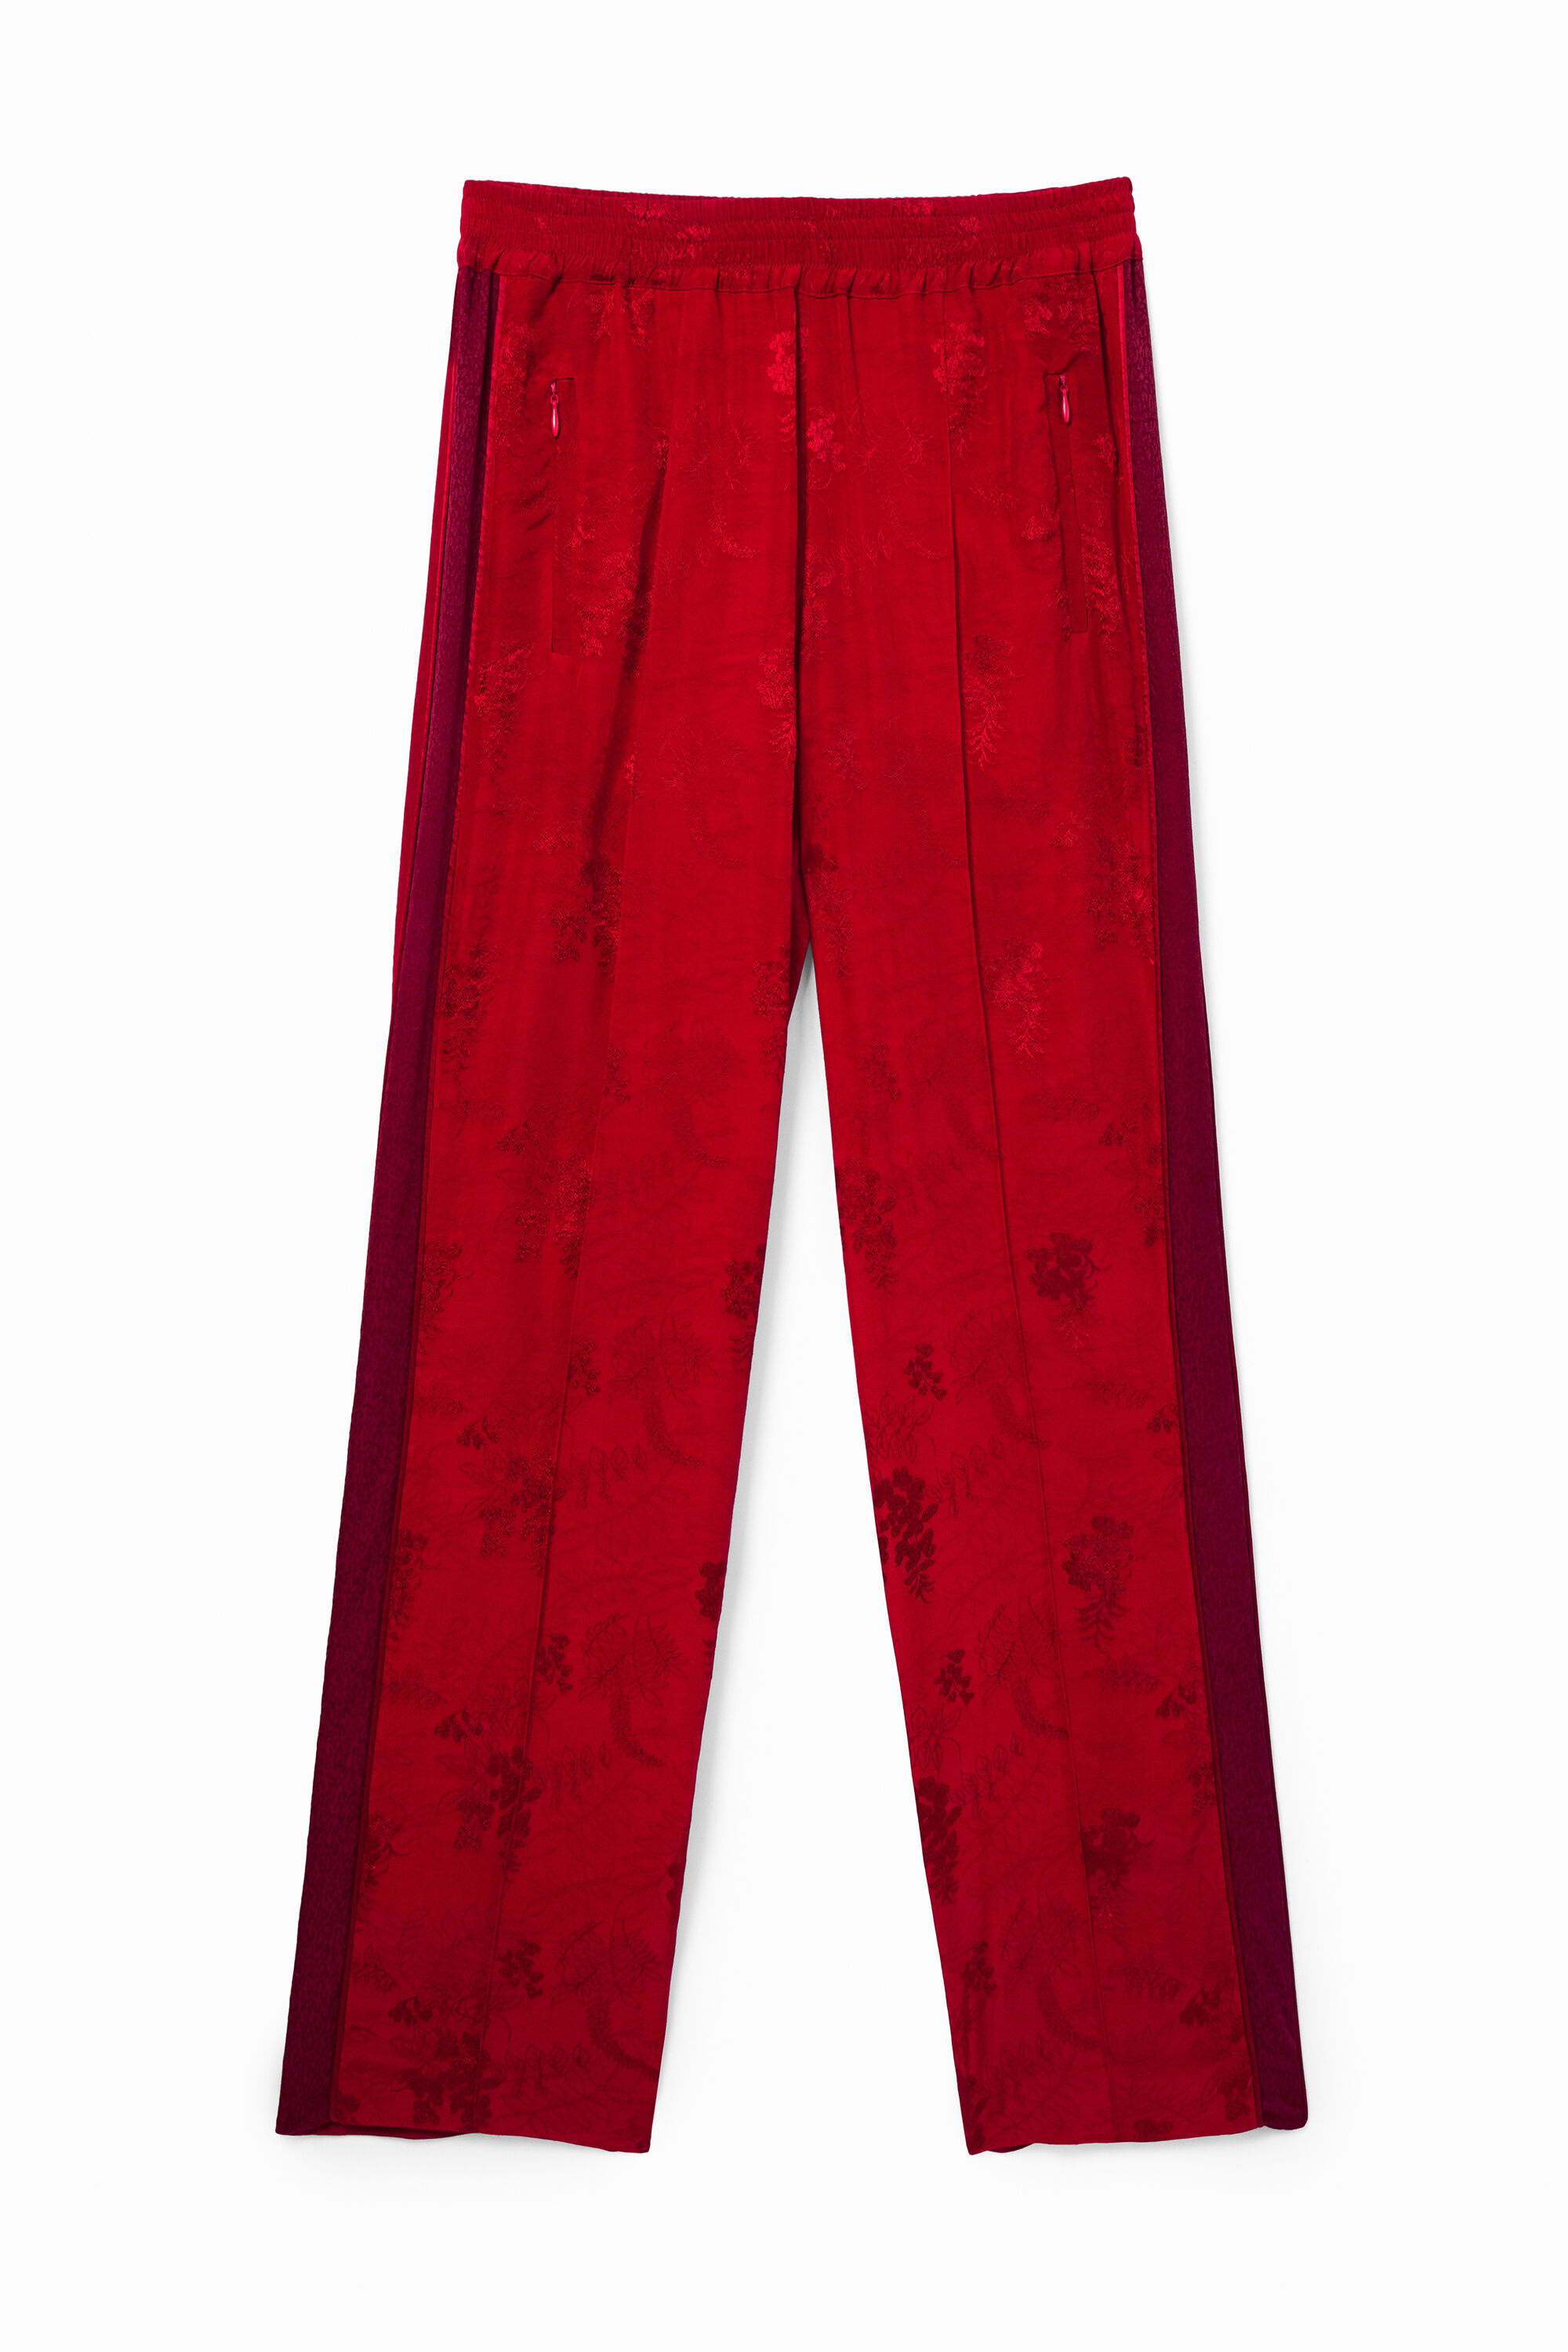 Jacquard sport trousers - RED - M